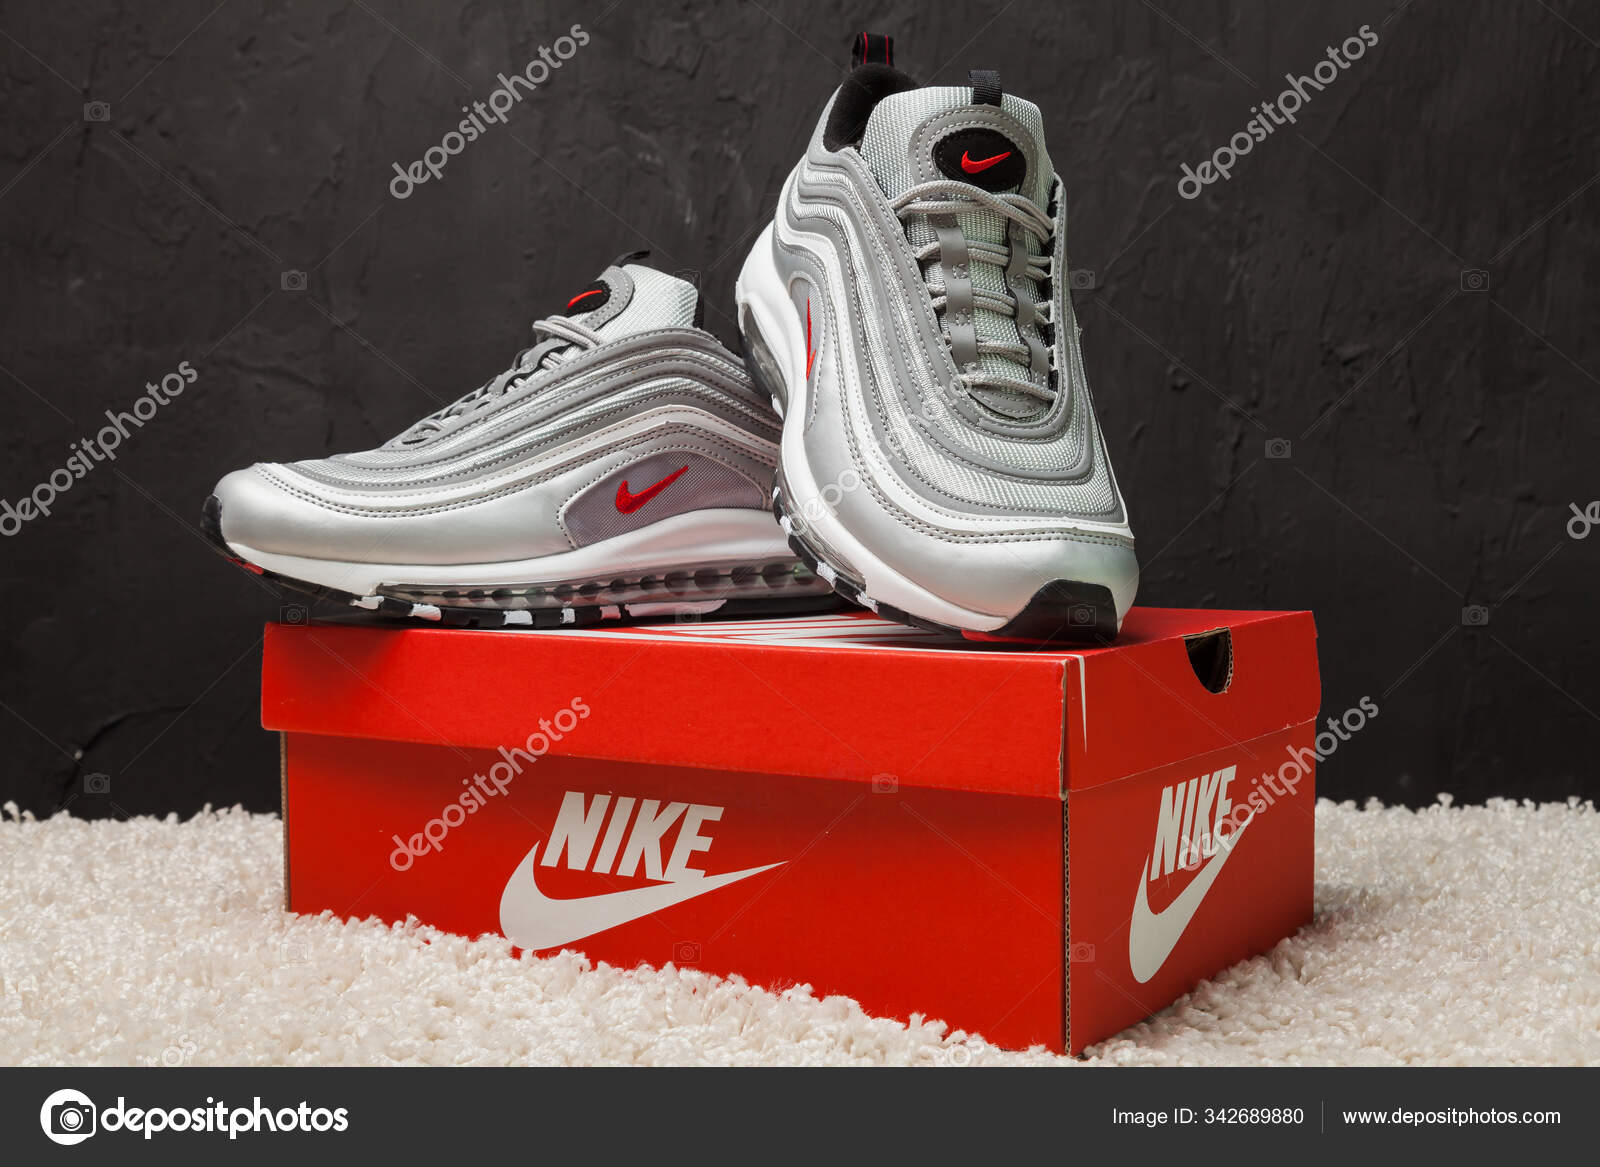 Beautiful Colorful Nice Nike Air Max Running Shoes Sneakers – Stock Editorial Photo © #342689880